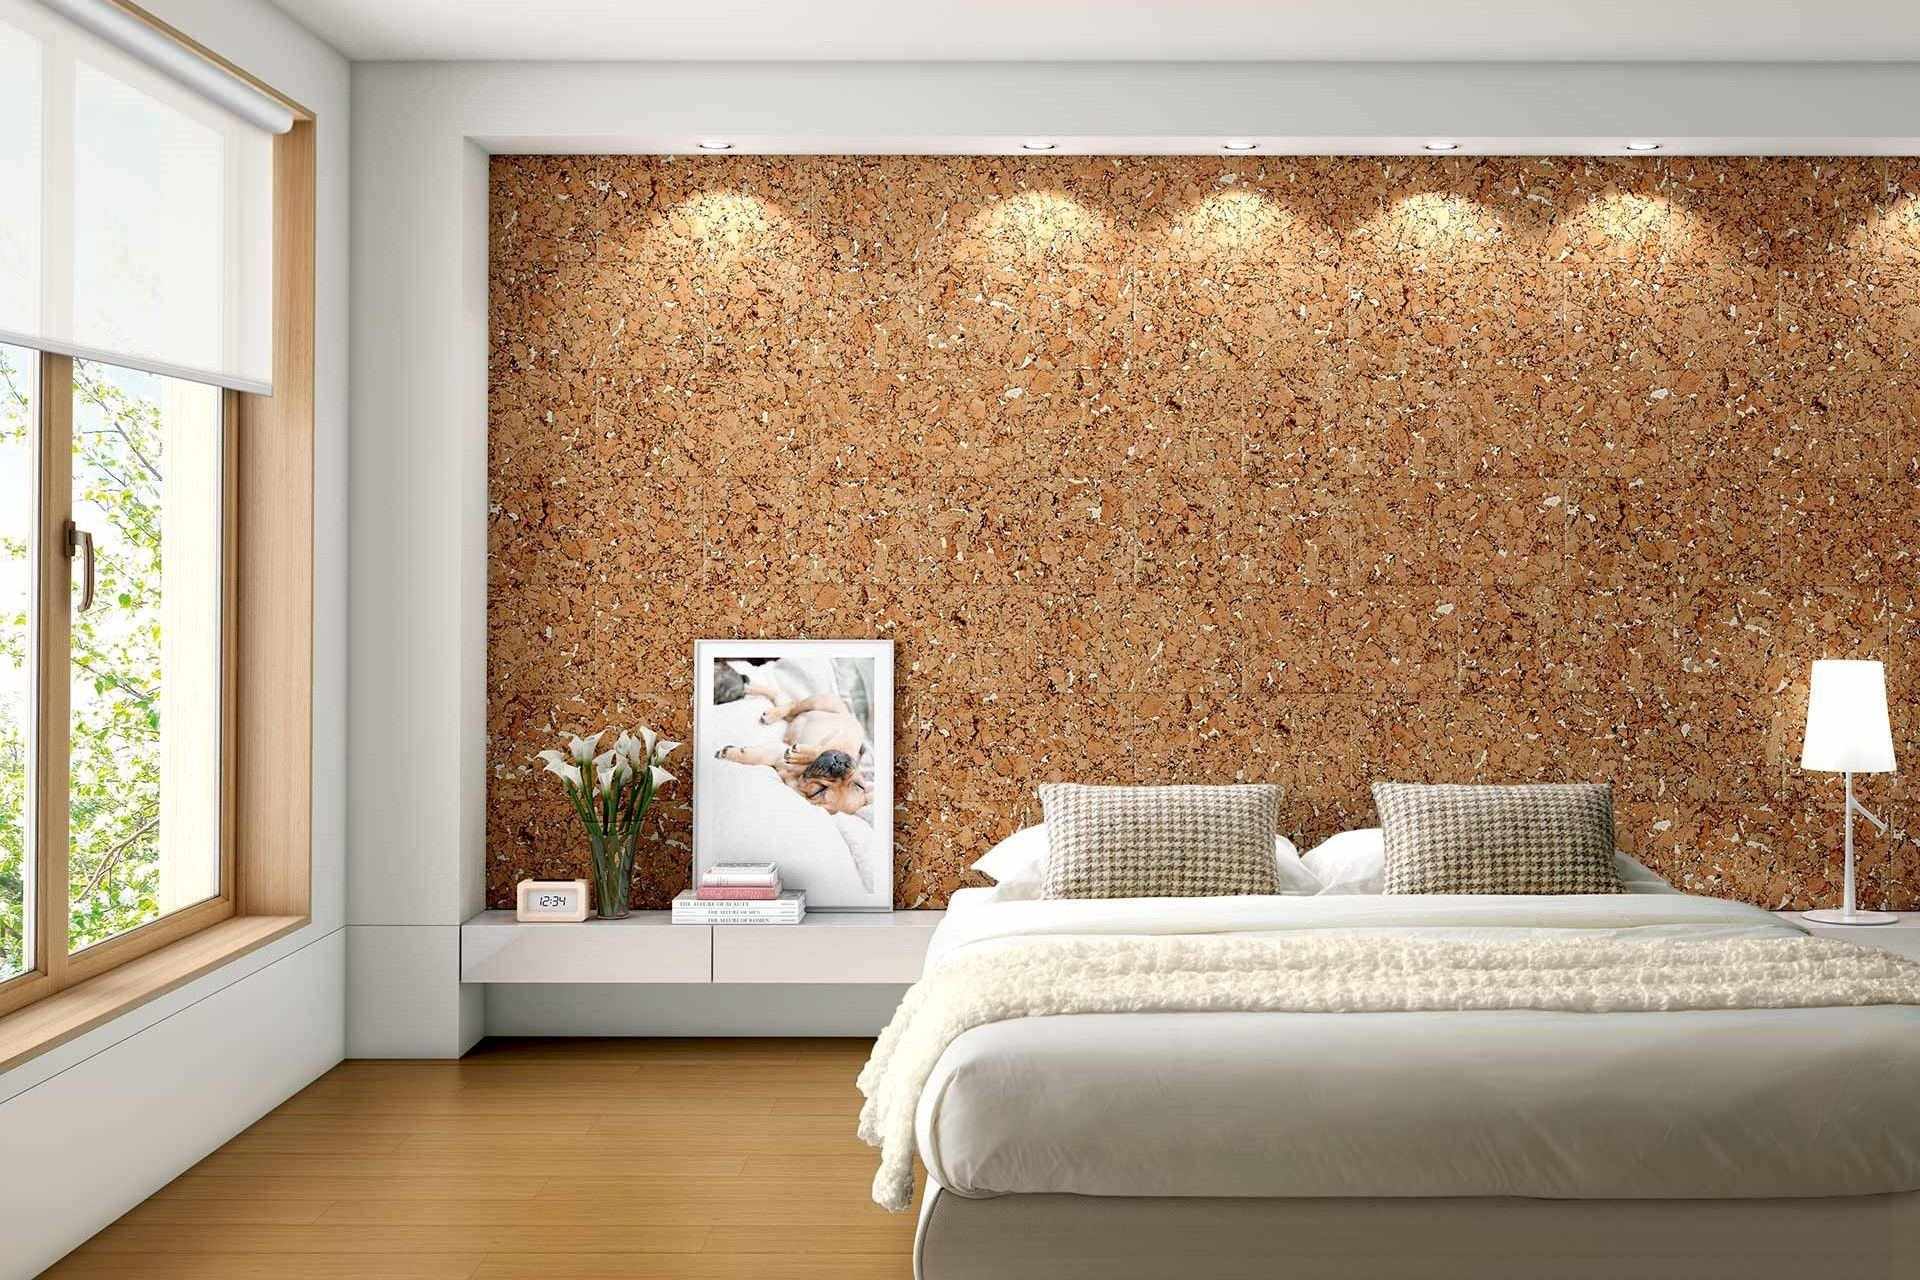 example of using cork in room decor